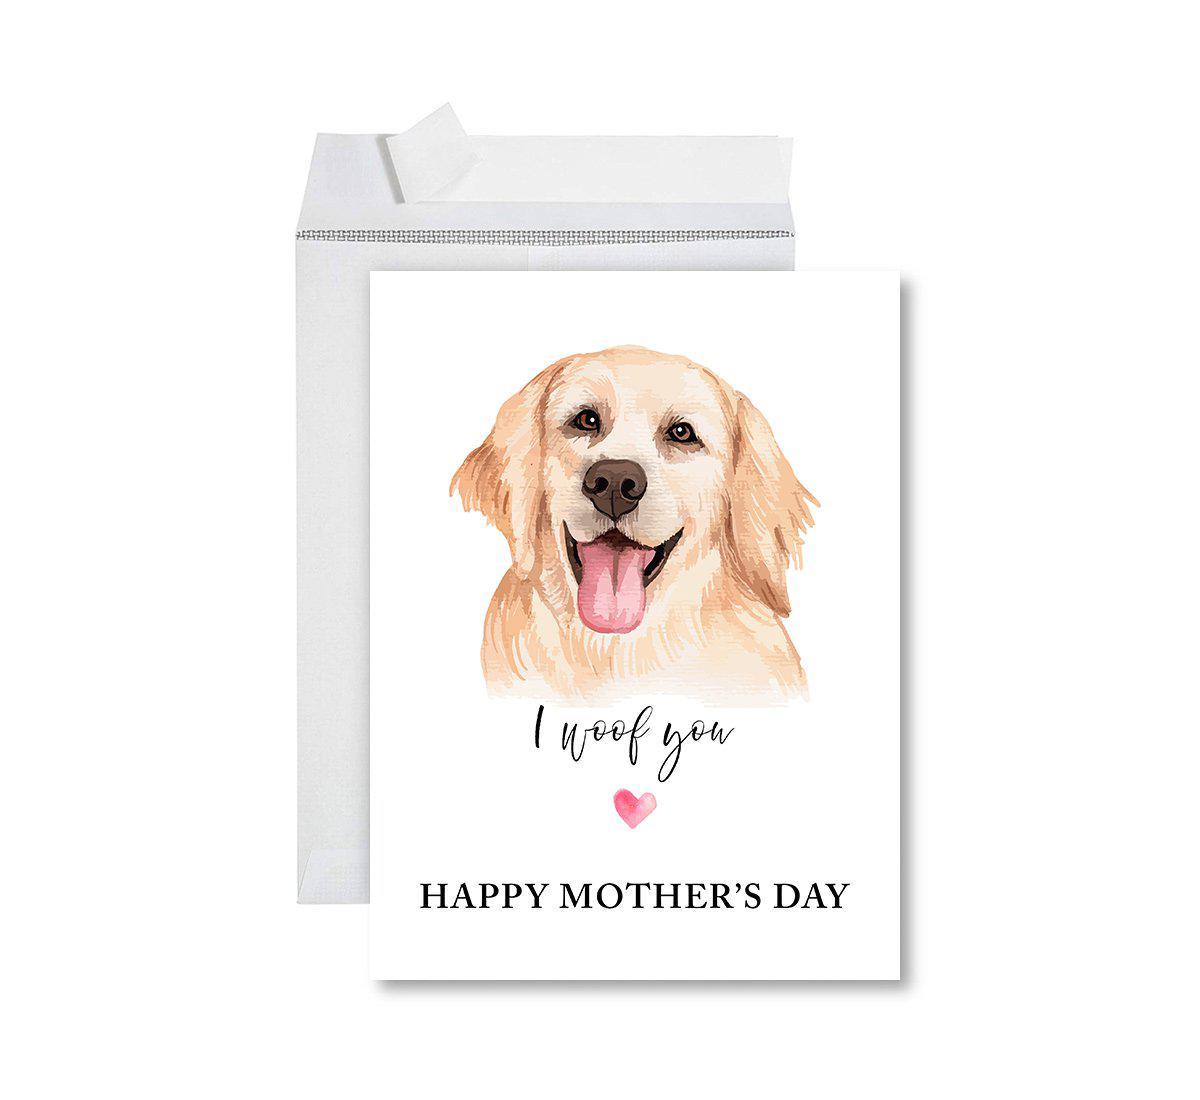 Mother's Day Party Supplies & Decorations